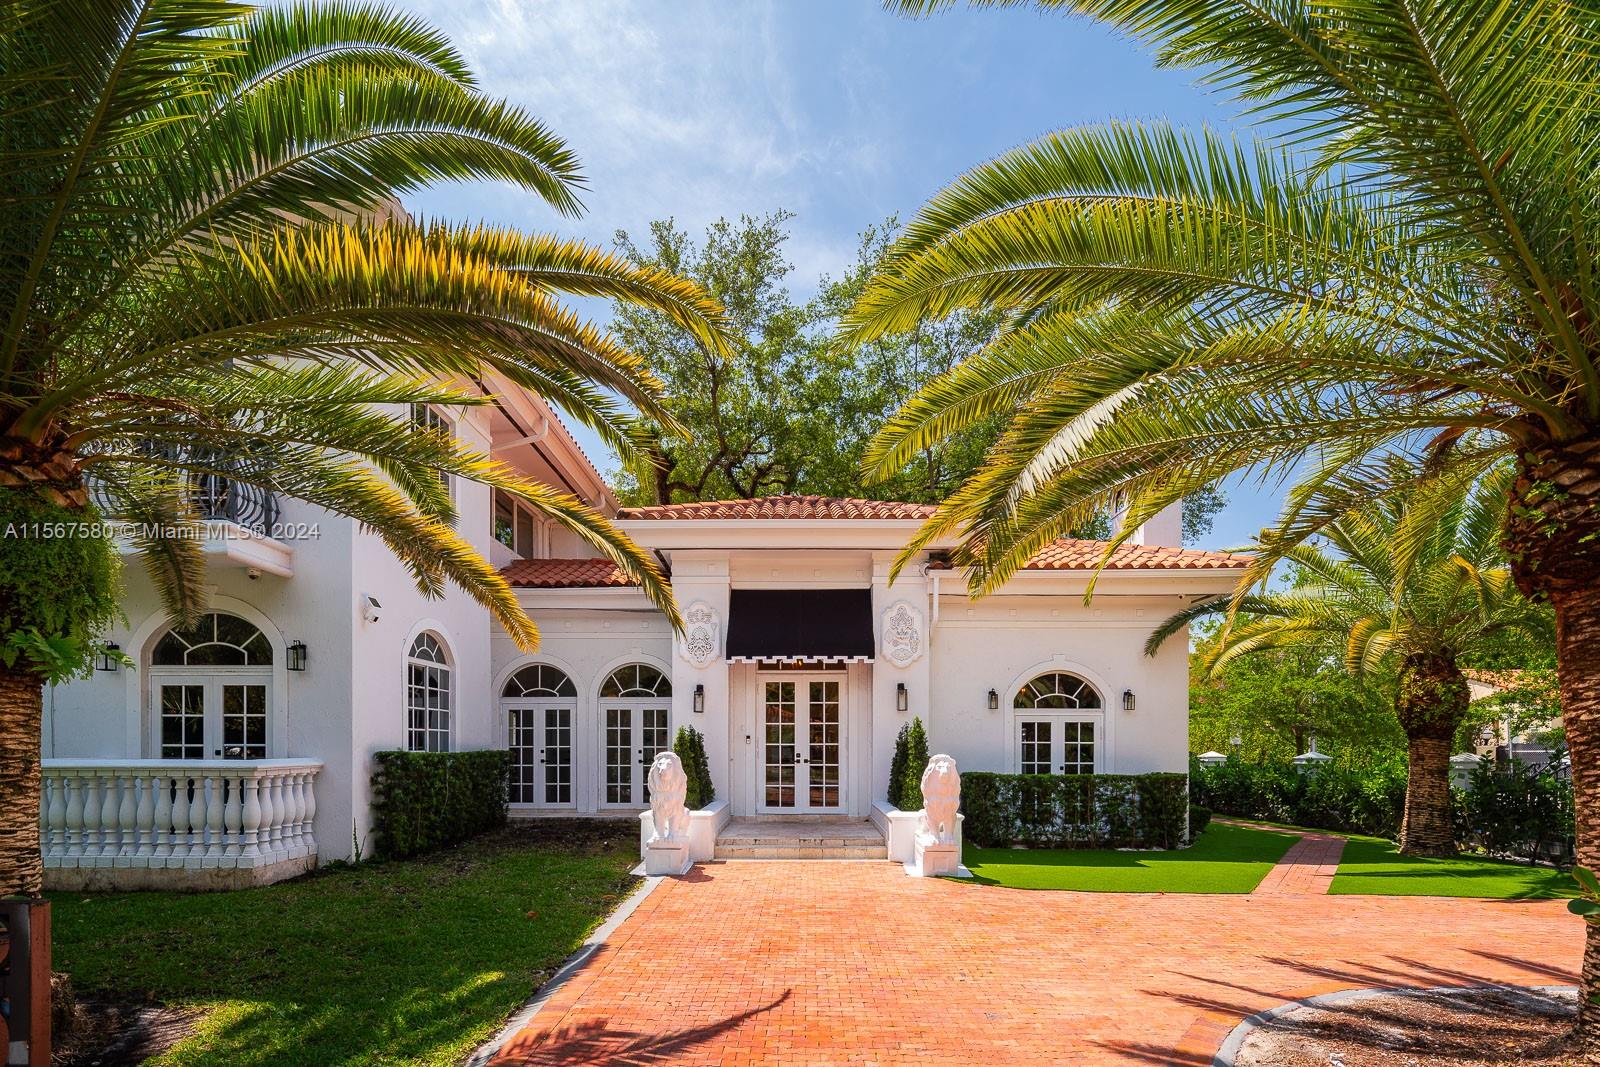 Palm Beach elegance renovated with youthful, exuberant styling by renowned and televised designer known for her projects in South Hamptons, Beverly Hills and Palm Beach. This close to 5000 sq' home is a remarkable breath of fresh air in a coveted neighborhood just steps to the Biltmore Hotel, Salvadore Park & Venetian Pool. Palladian windows & 14'-foot-tall ceilings add natural light & wide-open airiness throughout. The 13,875 sq. ' lot is walled & gated. First floor; foyer, formal living room with a wood-burning fireplace, family room, formal dining room, chef's kitchen, guest bedroom/bath, 2 large offices, 1/2 bath, poolside cabana with bath & central courtyard. 2nd floor: 24'X20' primary bedroom w/2 huge walk-in closets & 20'X13'10" primary bath + 3 other bedrms & 2 baths. 2 car garage.